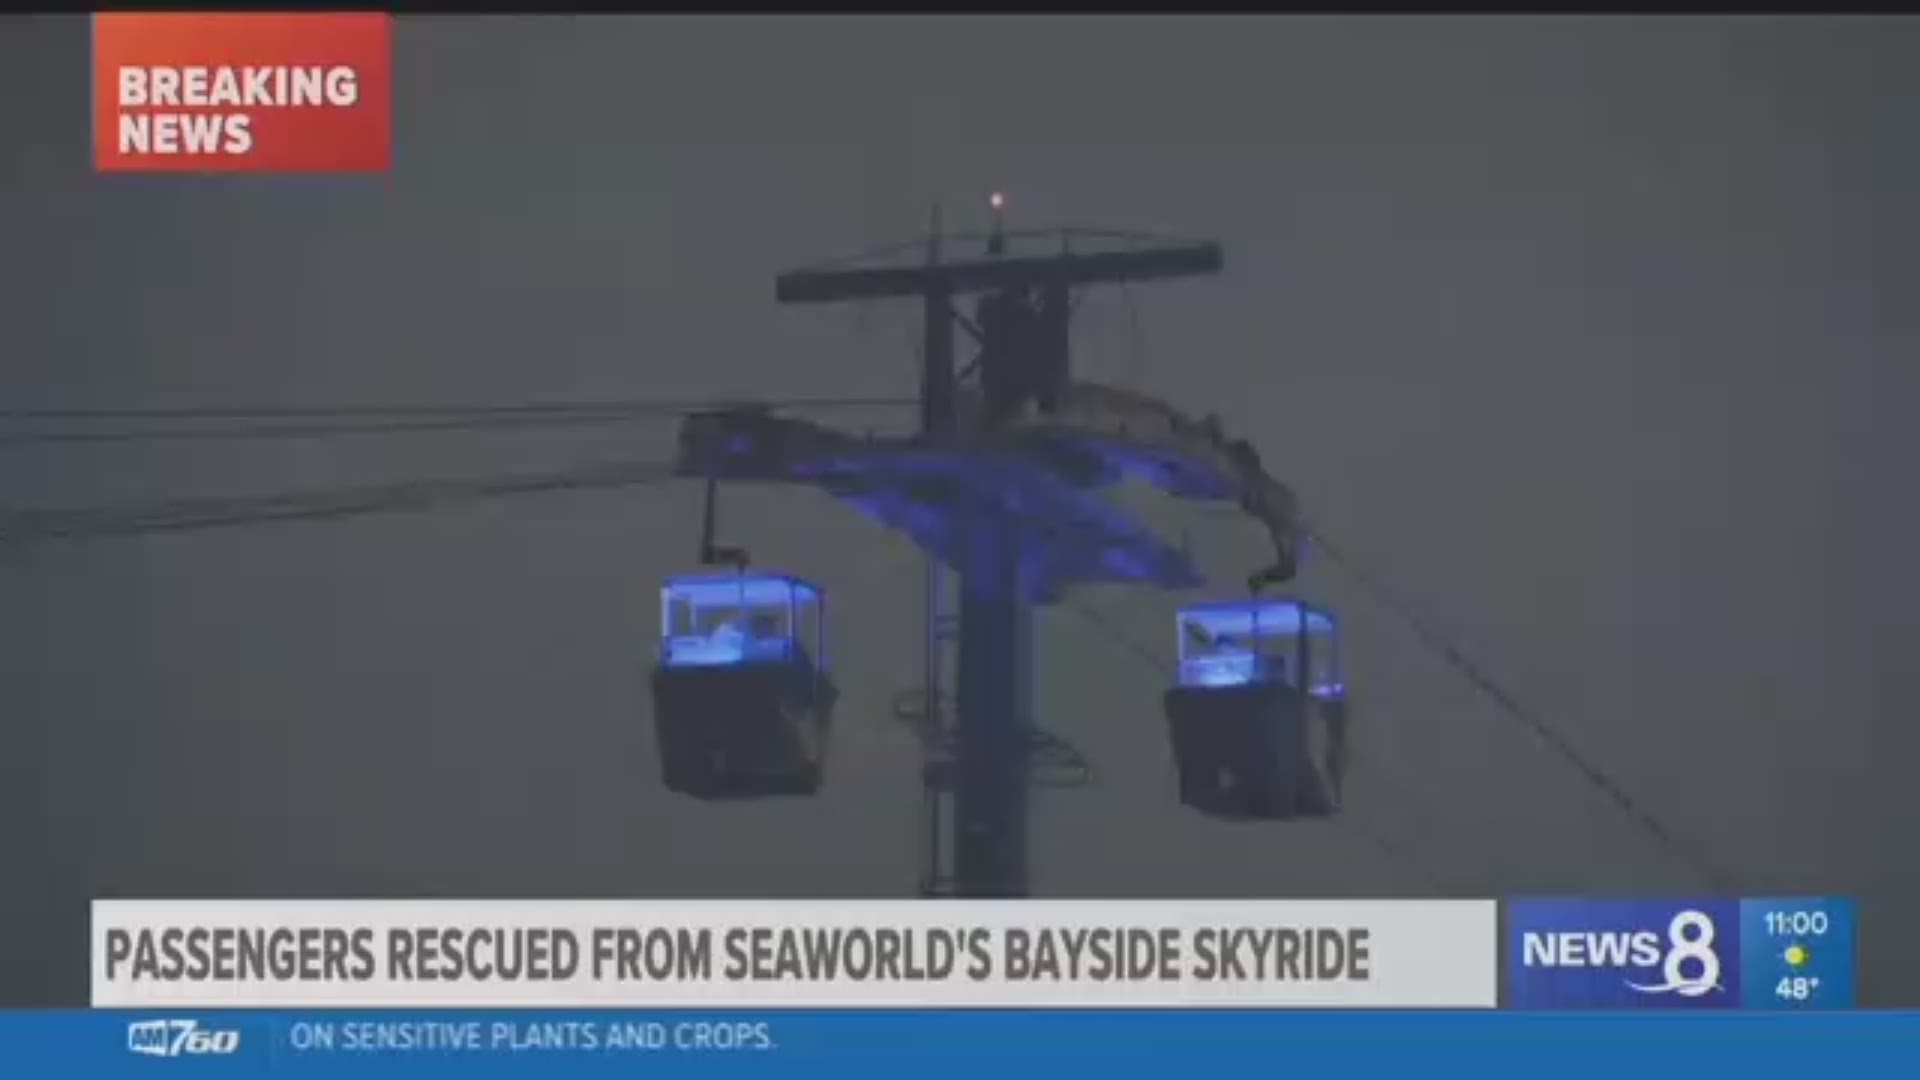 Passengers were trapped Monday night on the SeaWorld Bayside Skyride gondola ride over Mission Bay in San Diego.